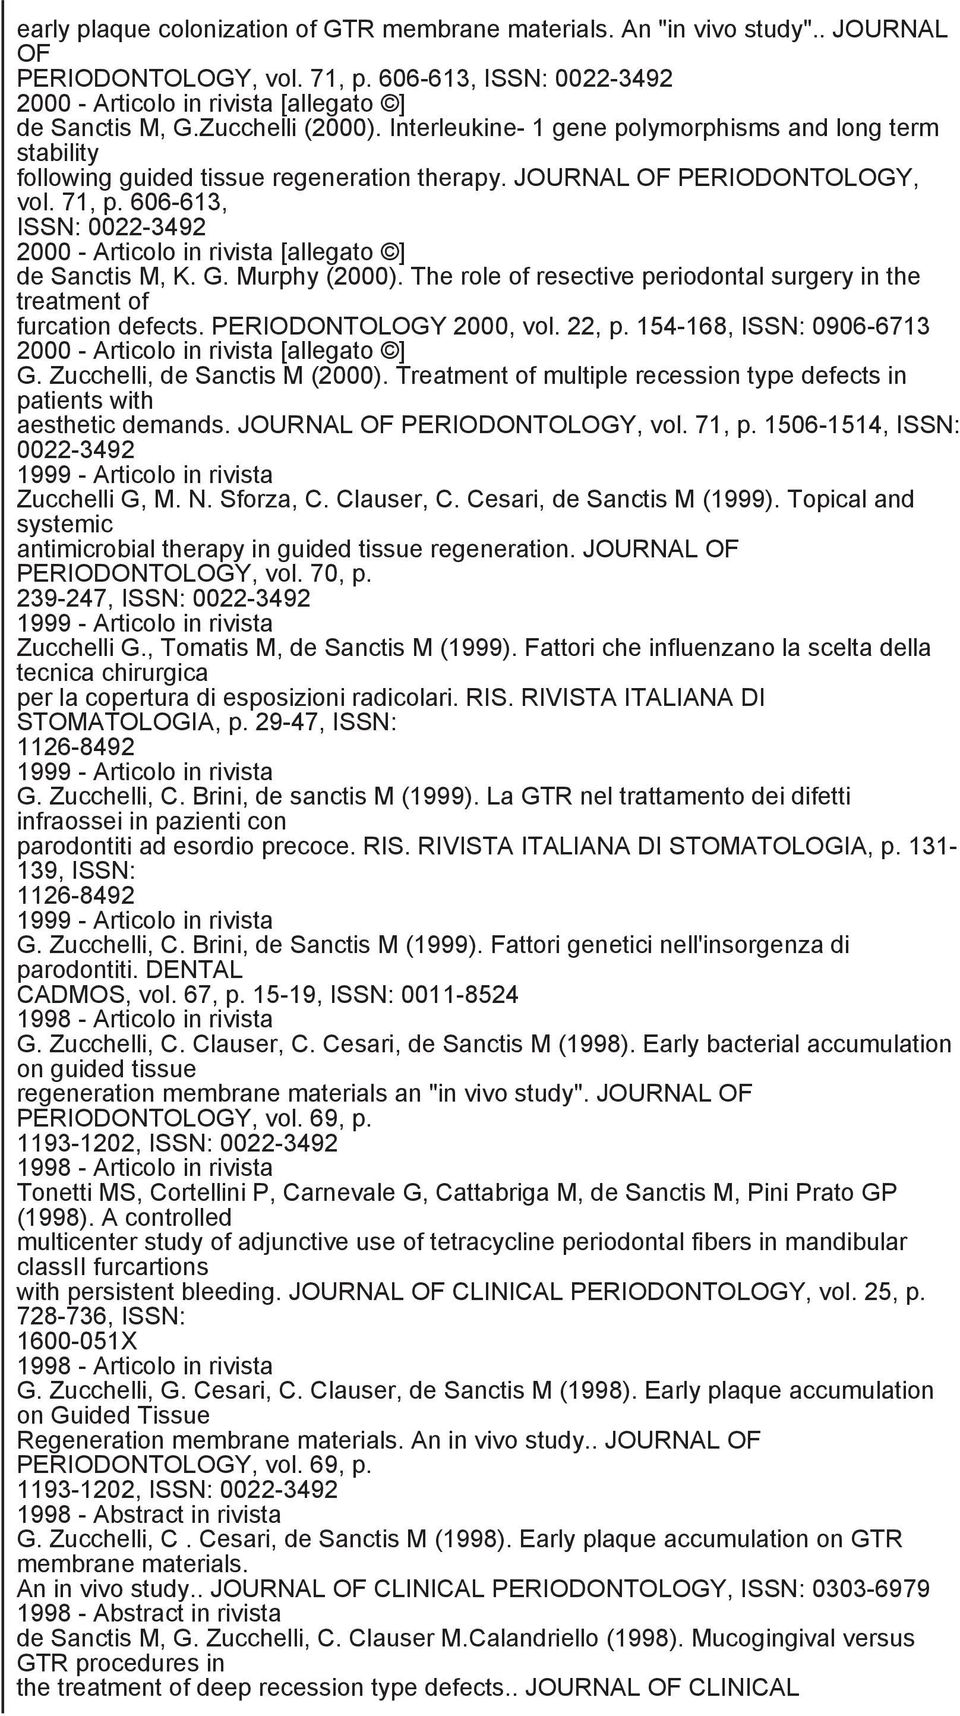 606-613, ISSN: 0022-3492 2000 - Articolo in rivista [allegato ] de Sanctis M, K. G. Murphy (2000). The role of resective periodontal surgery in the treatment of furcation defects.